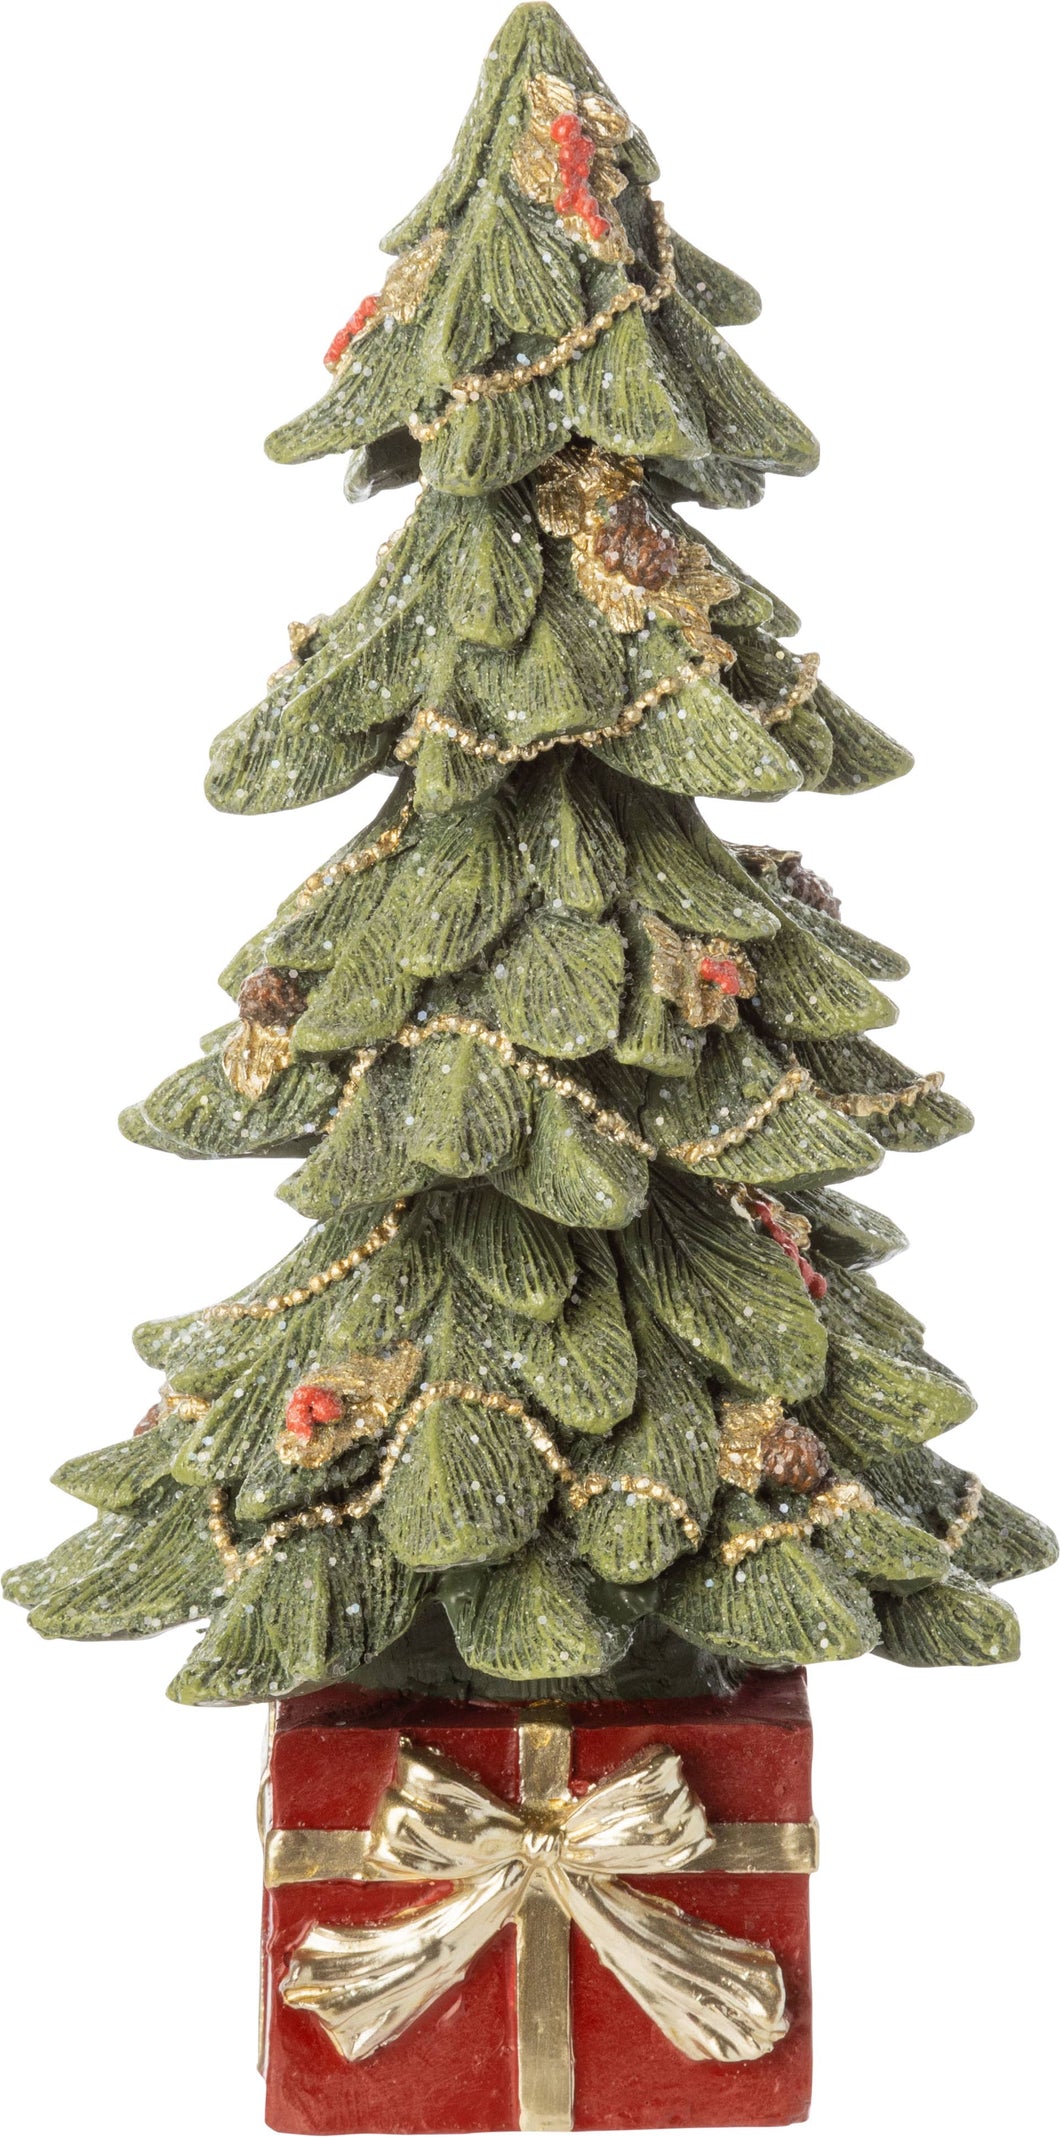 Silver Tree Home & Holiday - A49177-Pnted rsn Xmas tree,gift TT,10in